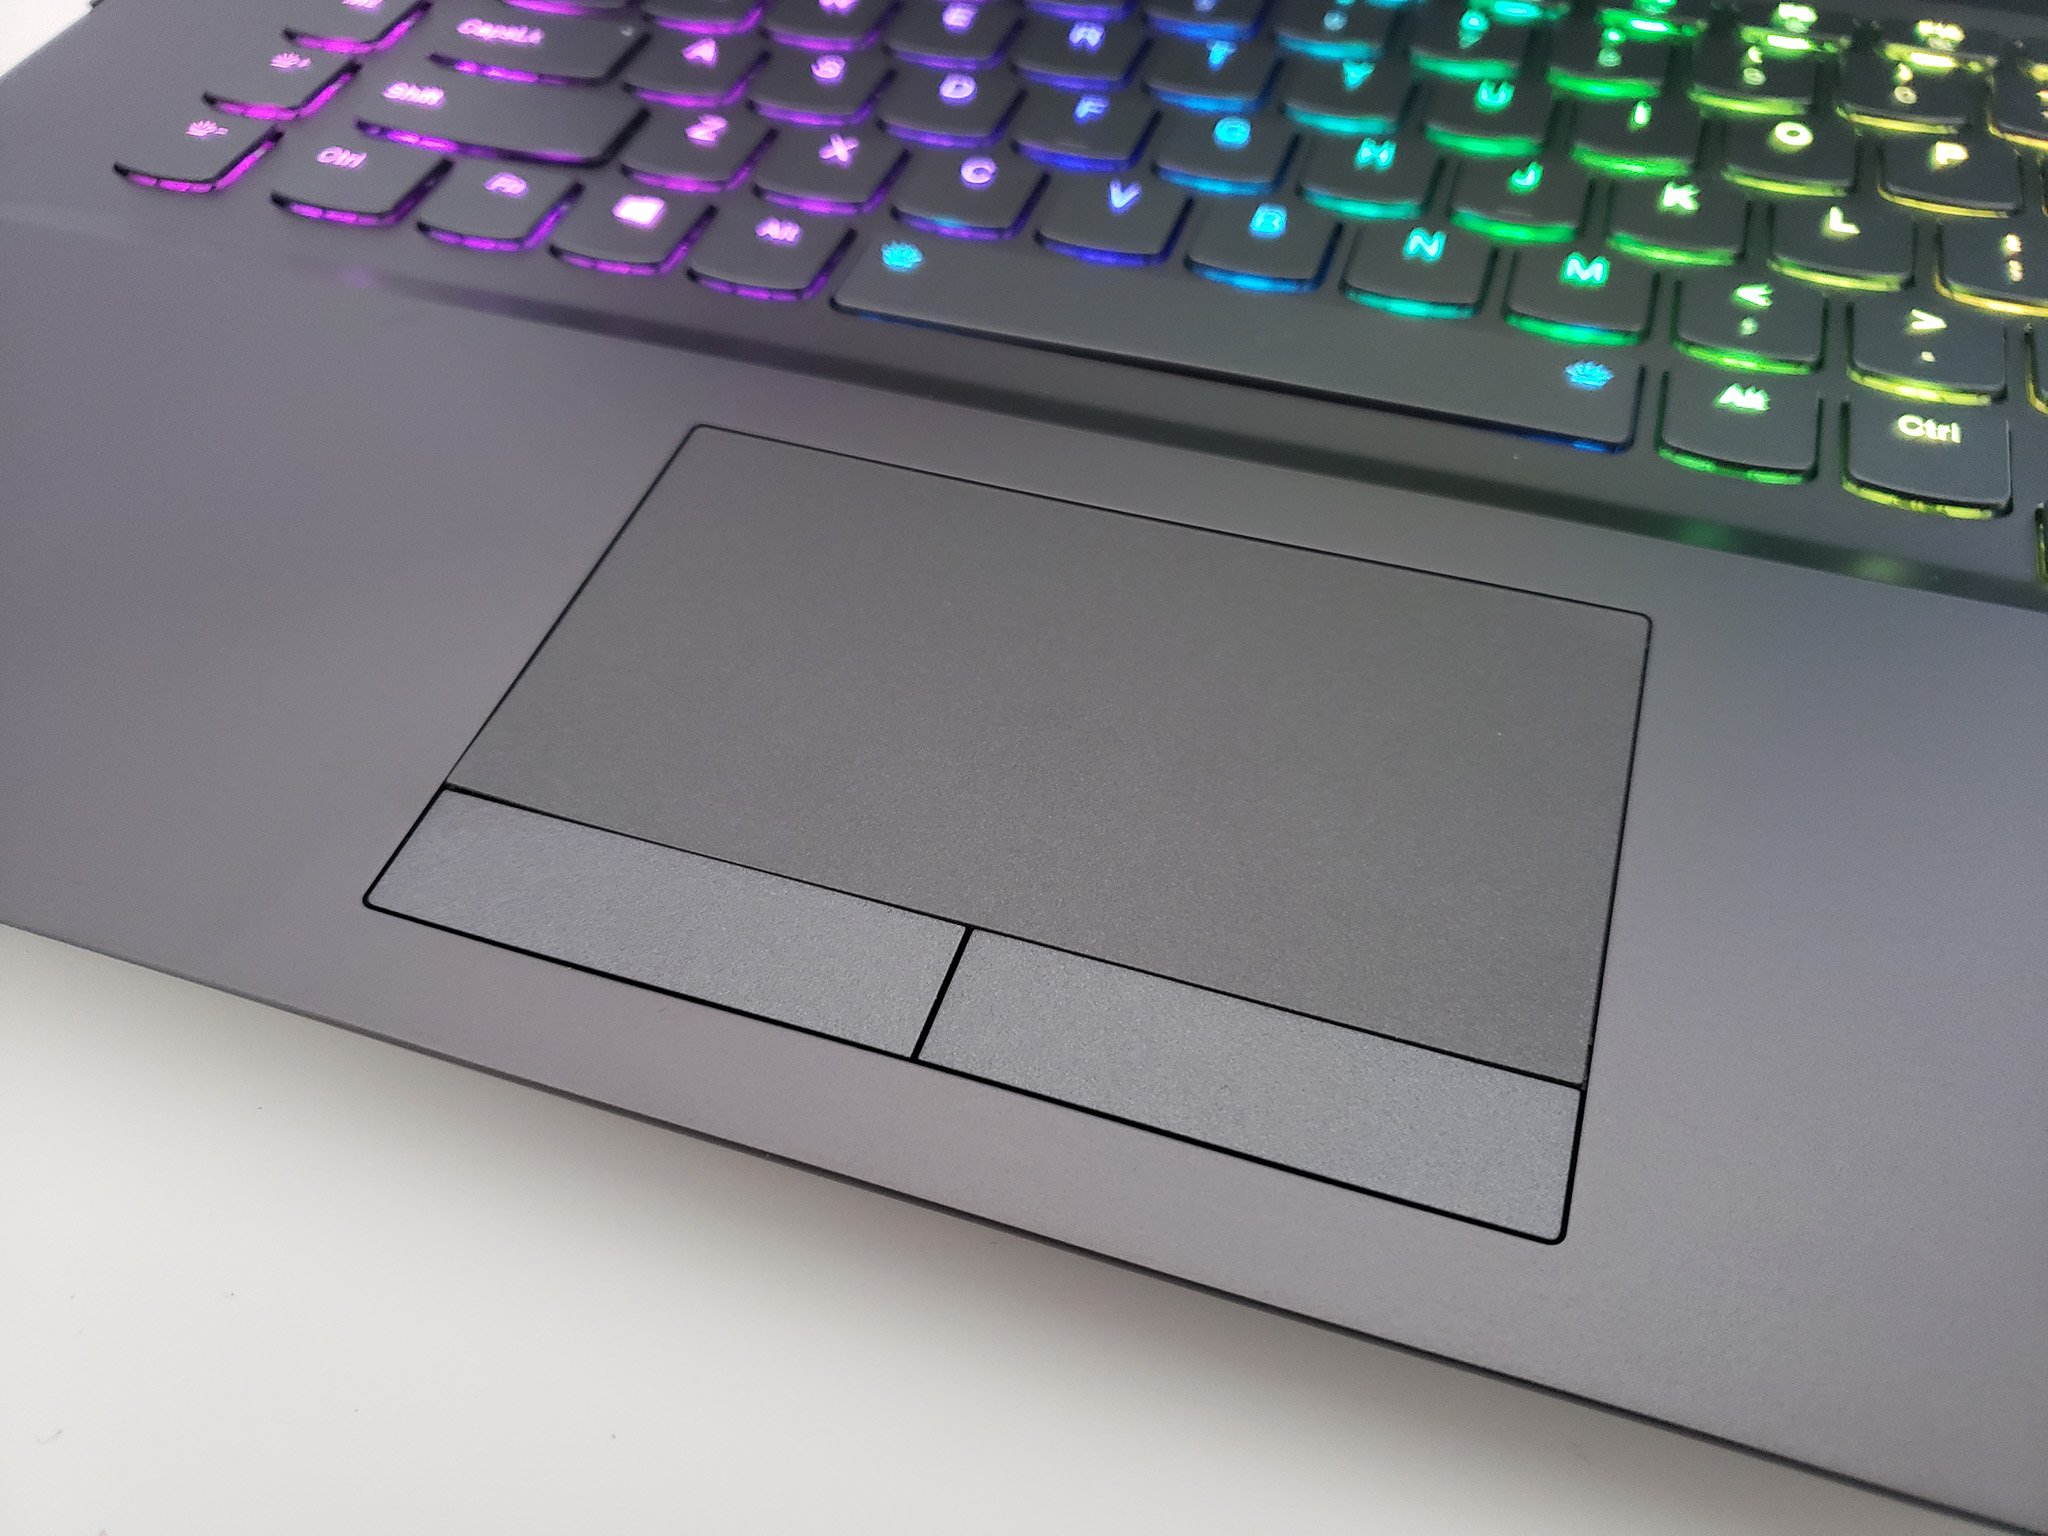 What are Microsoft Precision touchpad drivers?